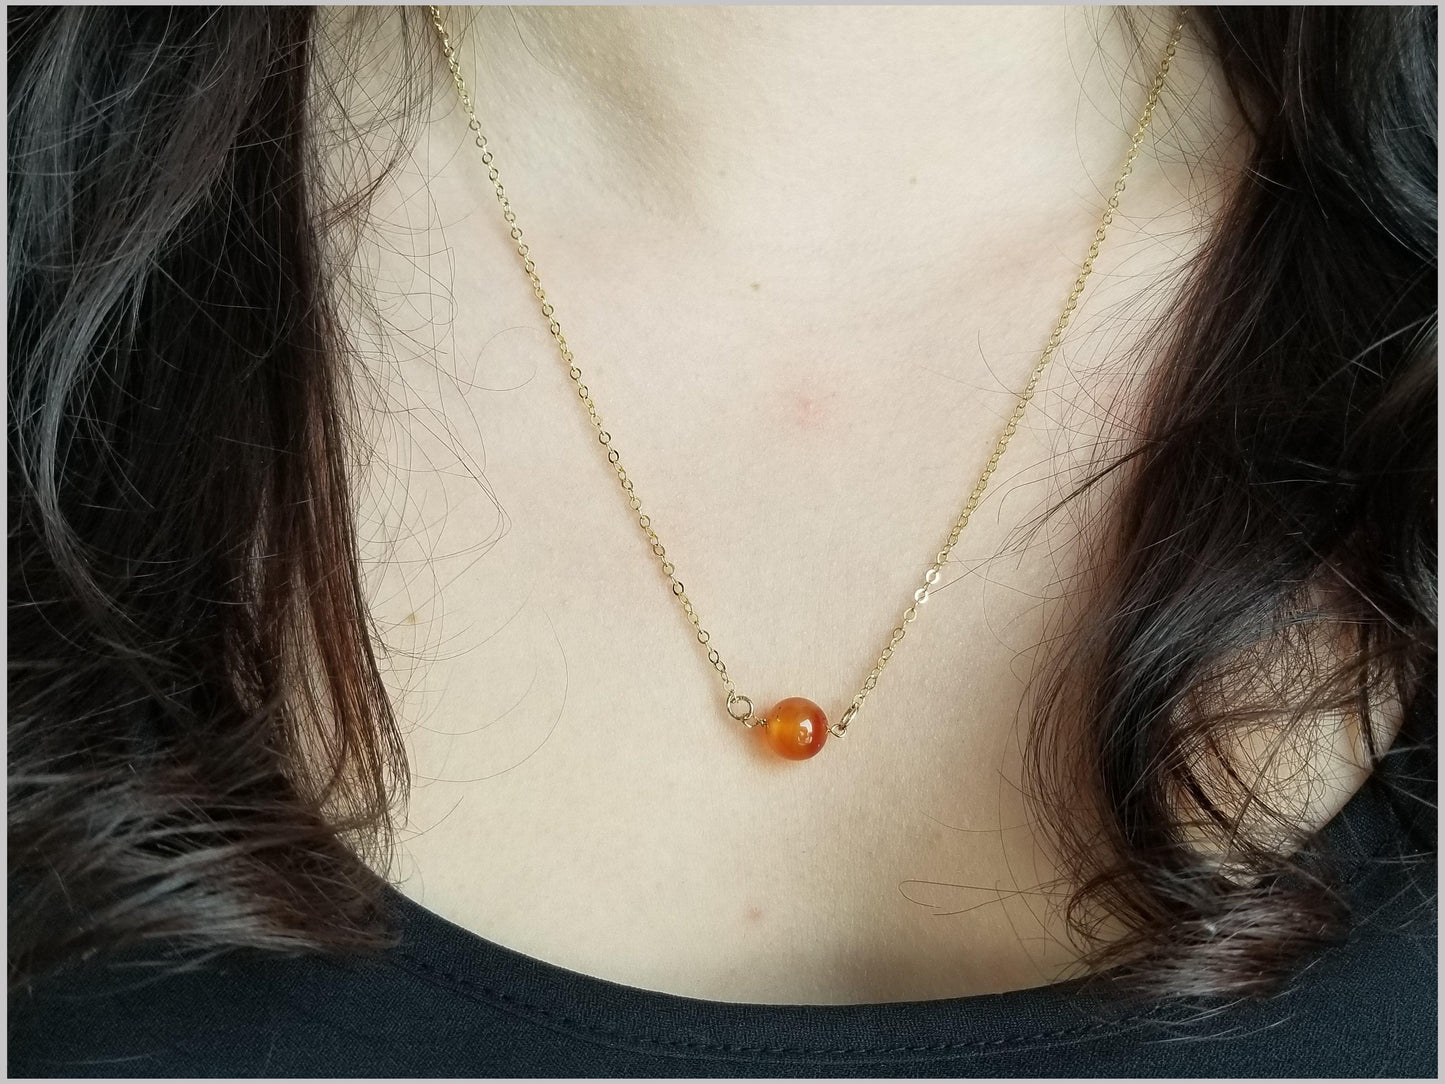 Natural Agate Bead Necklace